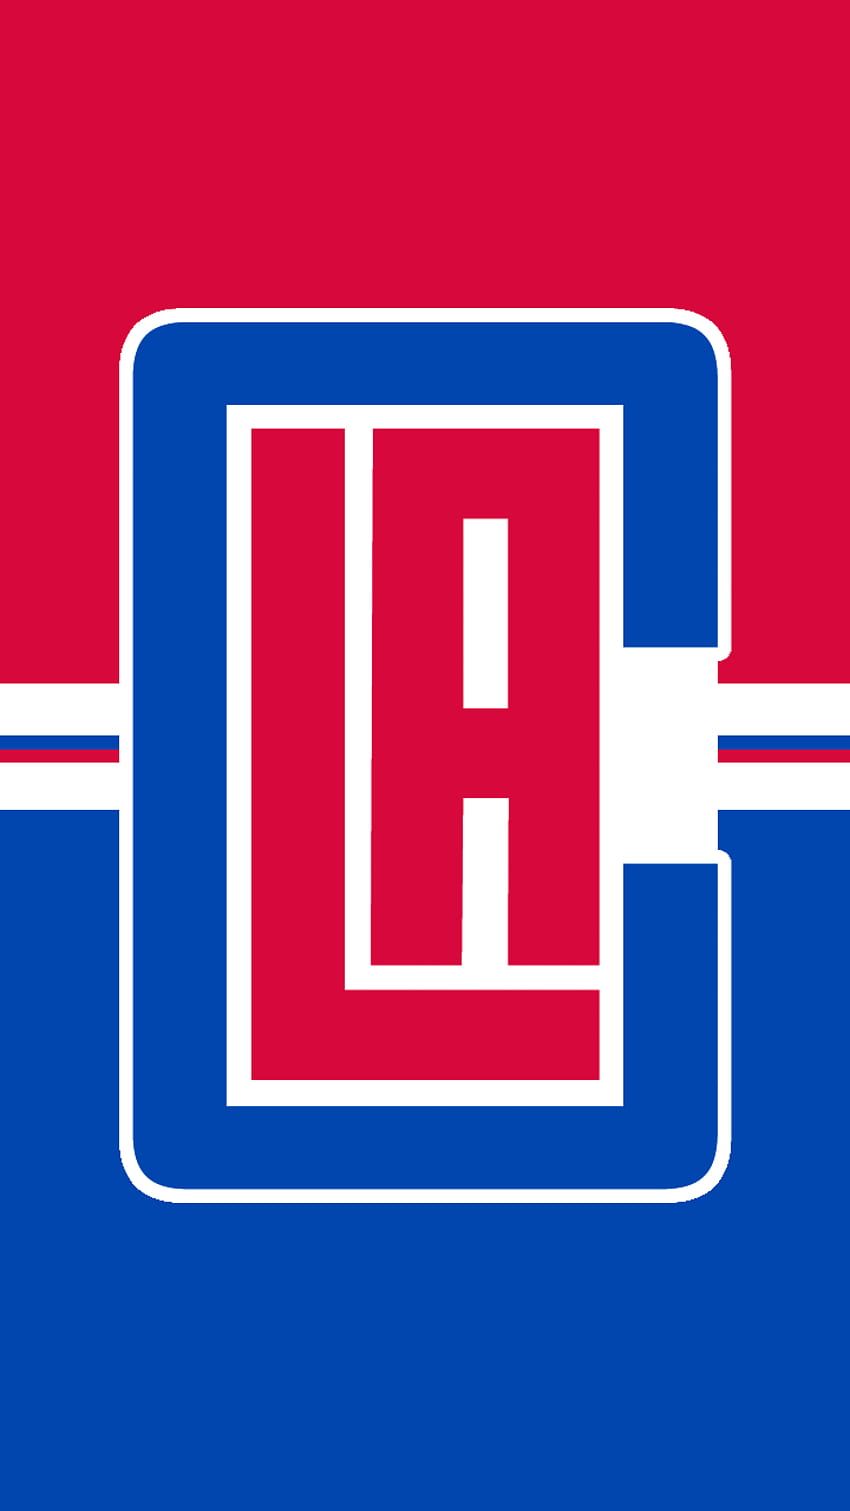 Направи Clippers Mobile! : LAClippers, Los Angeles Clippers HD тапет за телефон